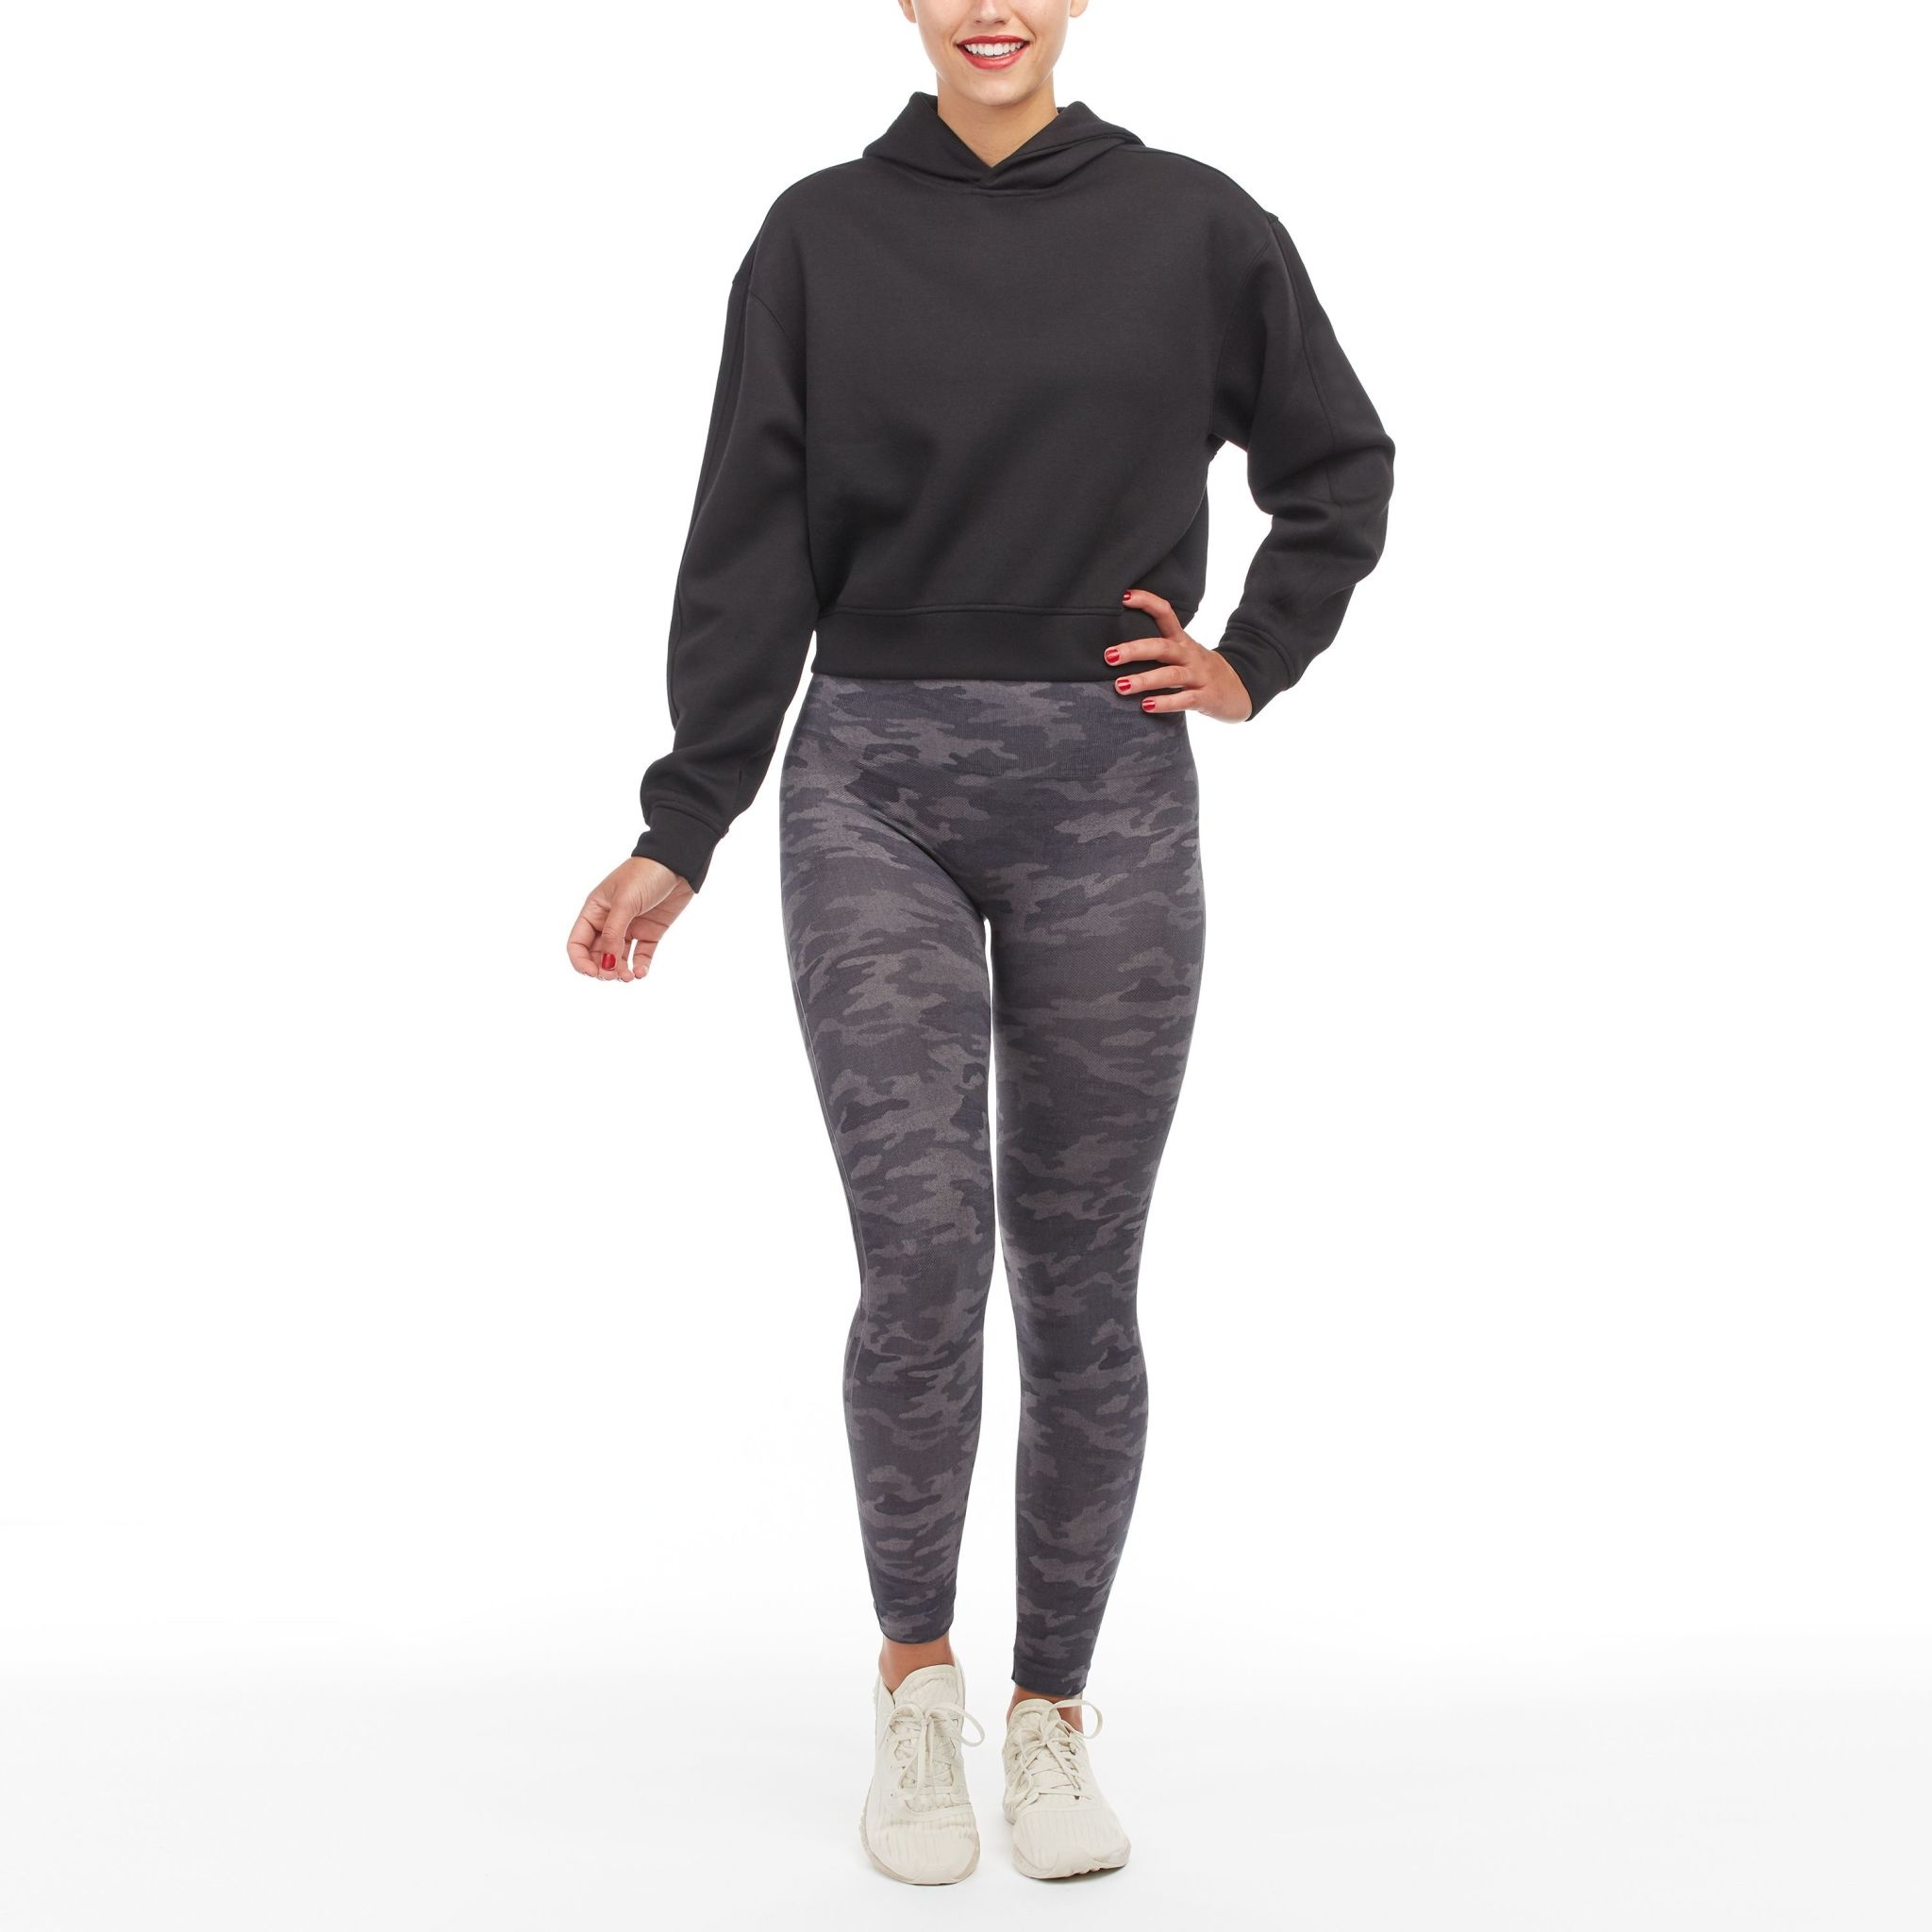 Spanx Look At Me Now Full Length Black Camo Seamless Leggings Small - $32 -  From Samantha